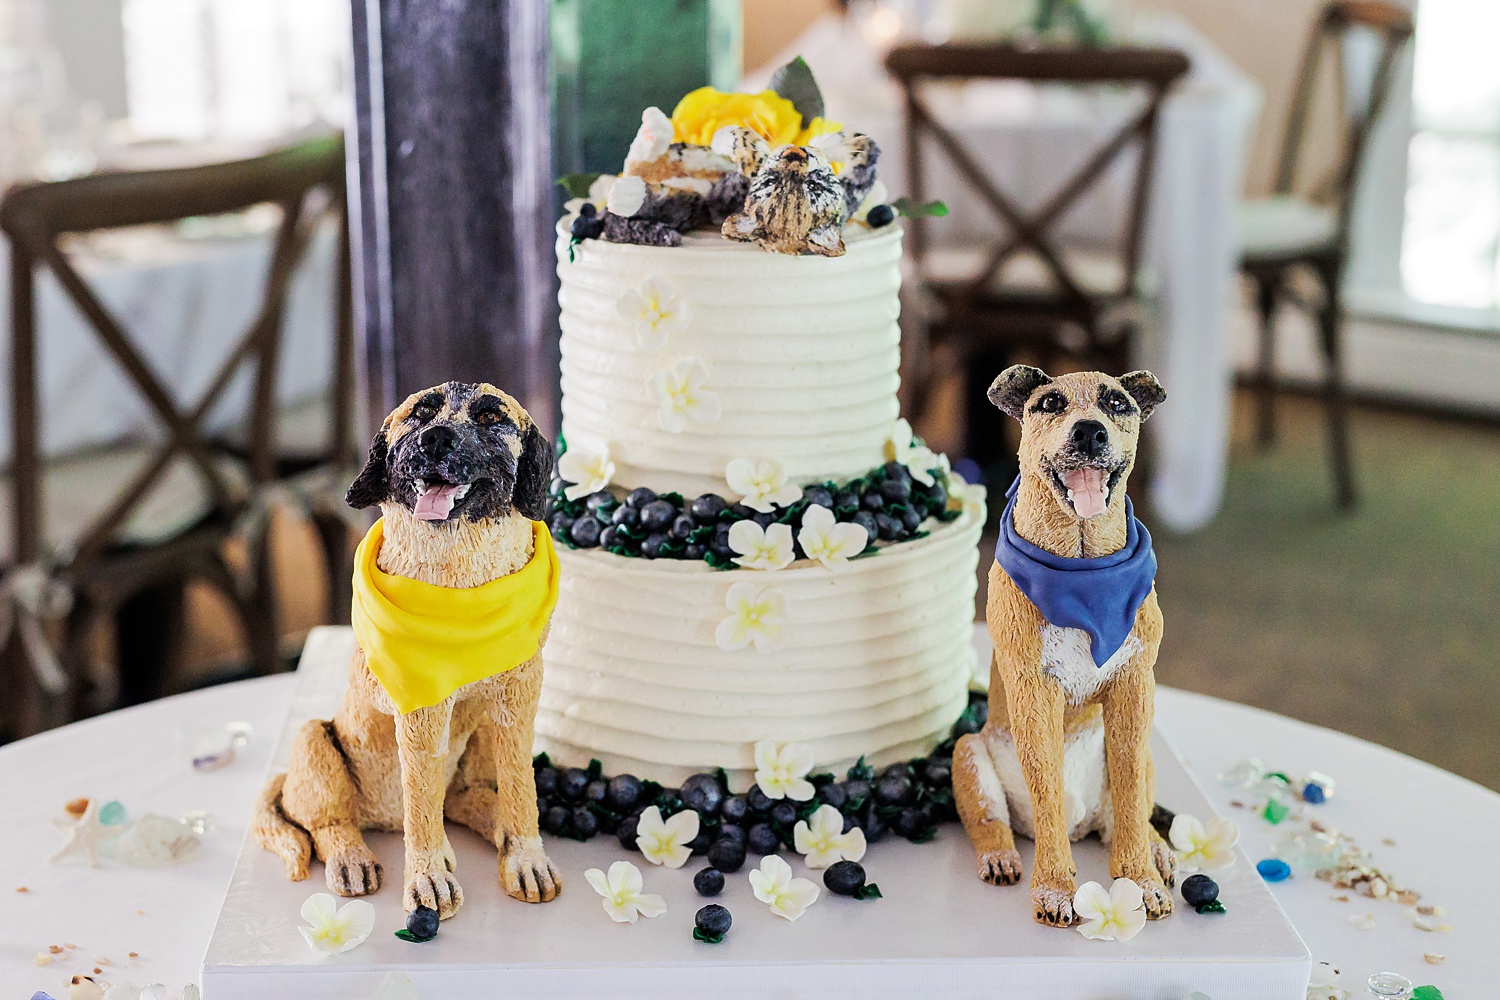 Wedding day cake featuring the couple's pets